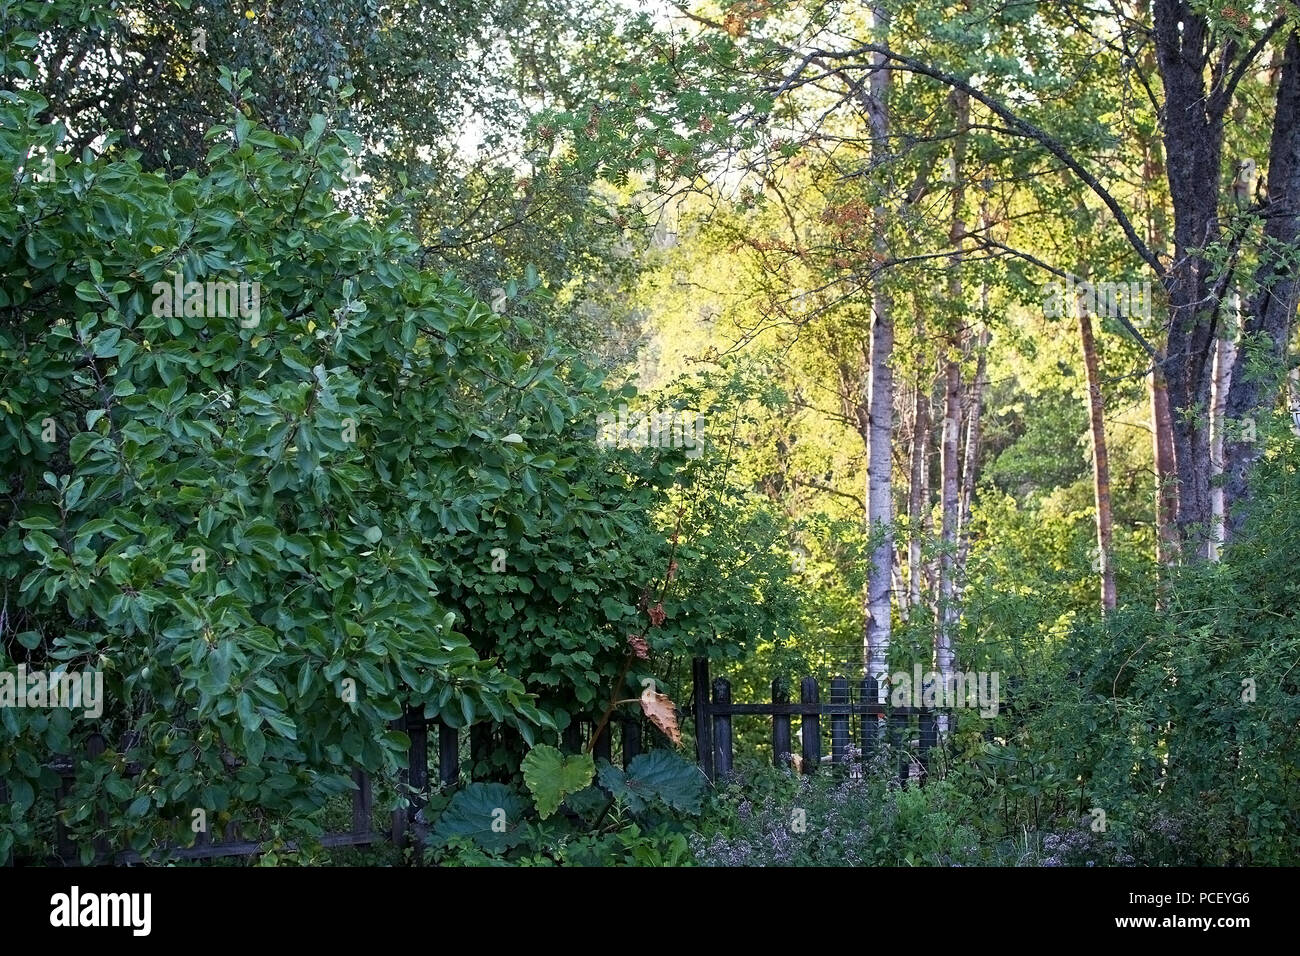 Evening sunlight in the fresh green foliage of birch trees in a garden Sweden in July. Stock Photo